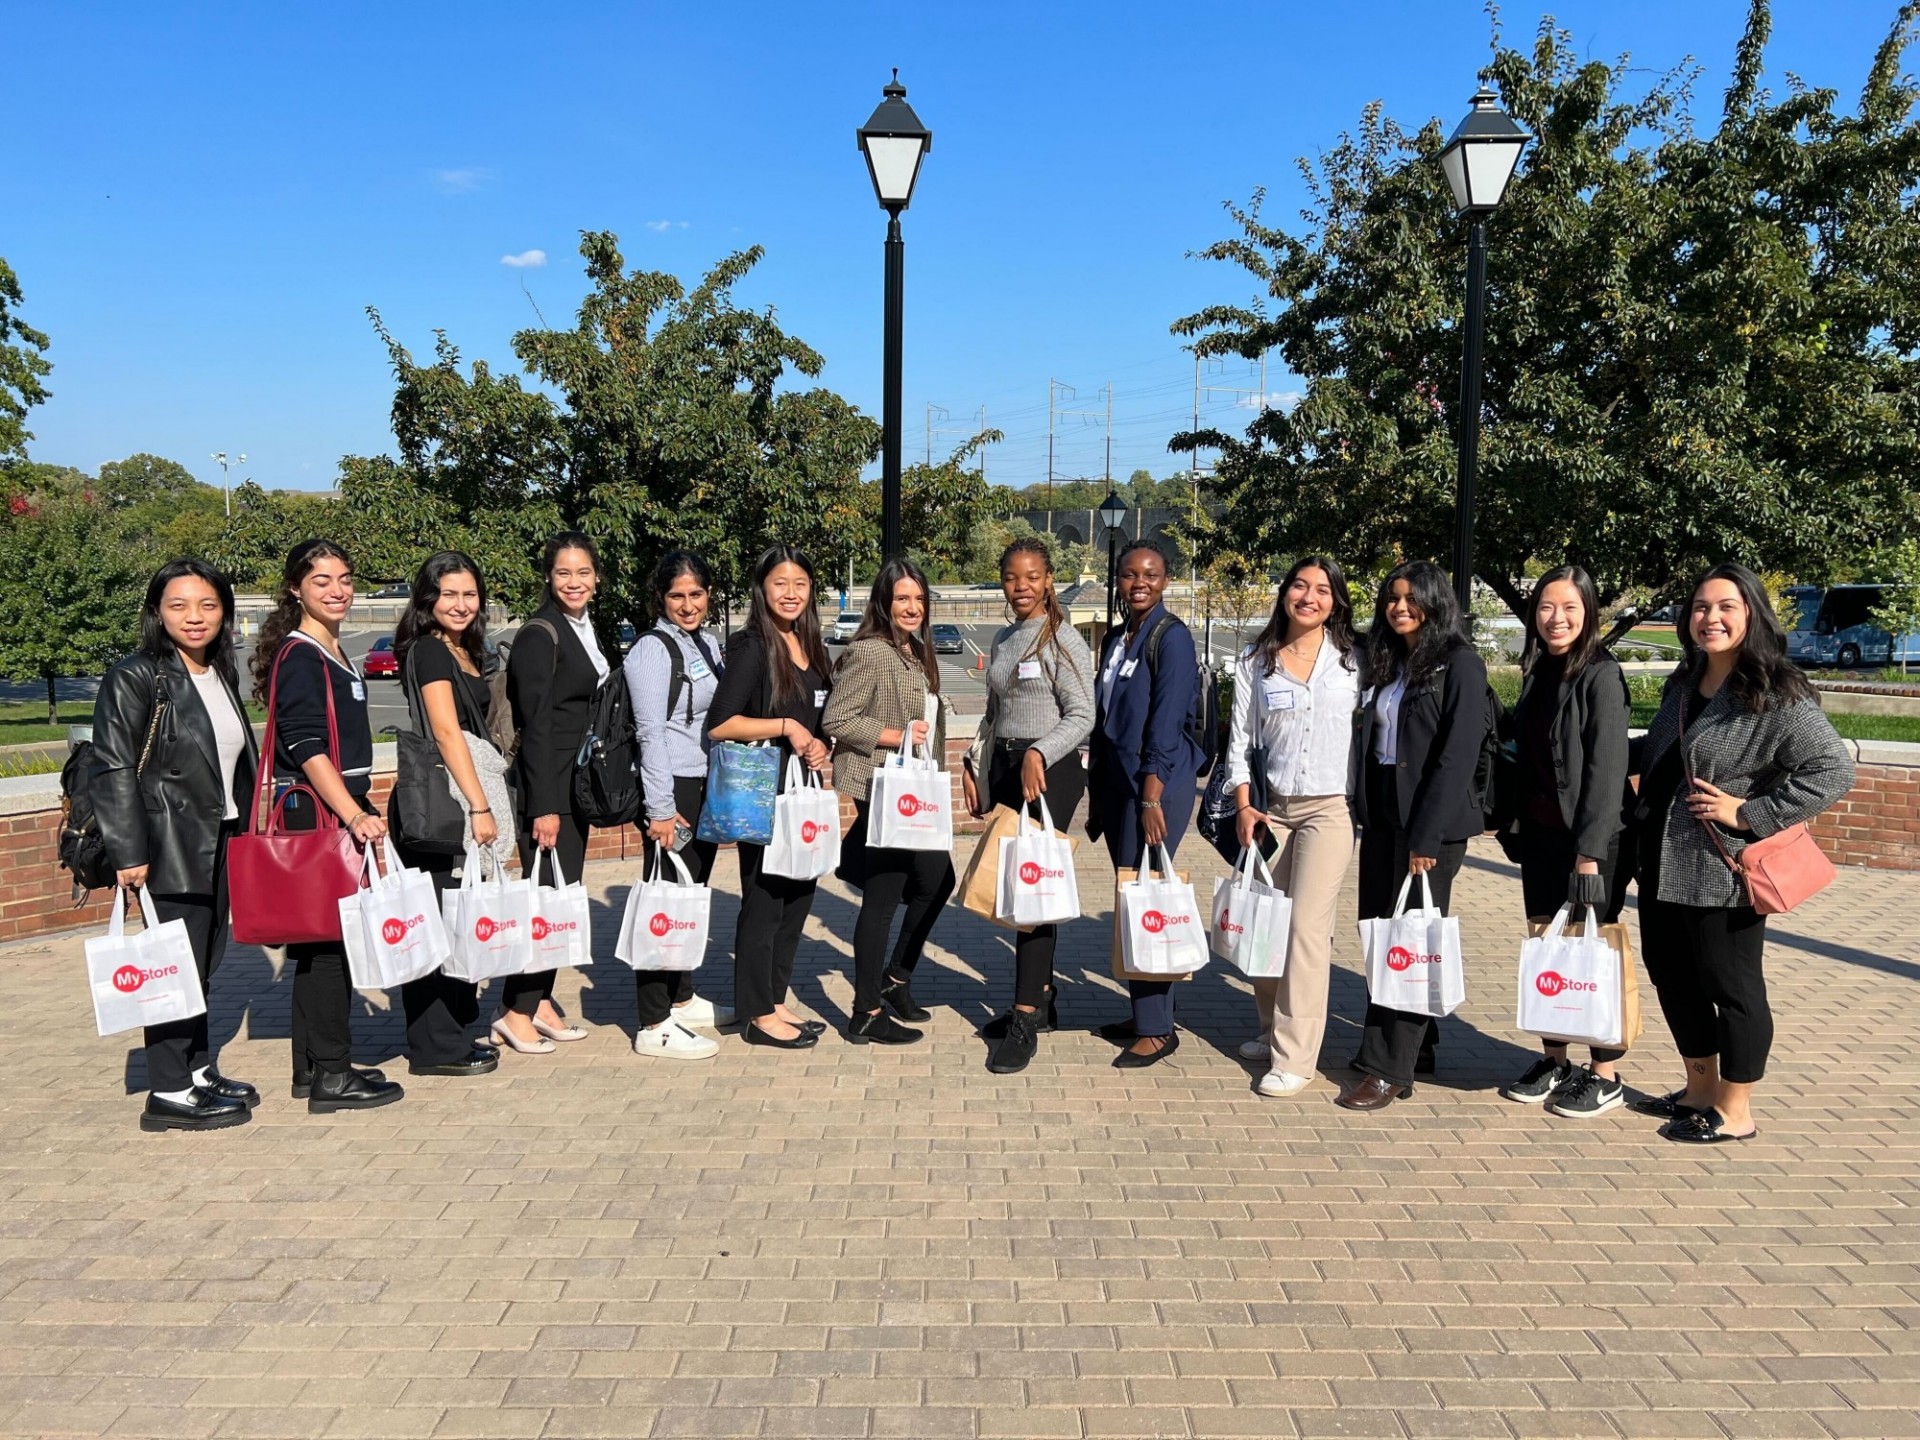 Women engineers visiting the Johnson & Johnson Museum in New Jersey